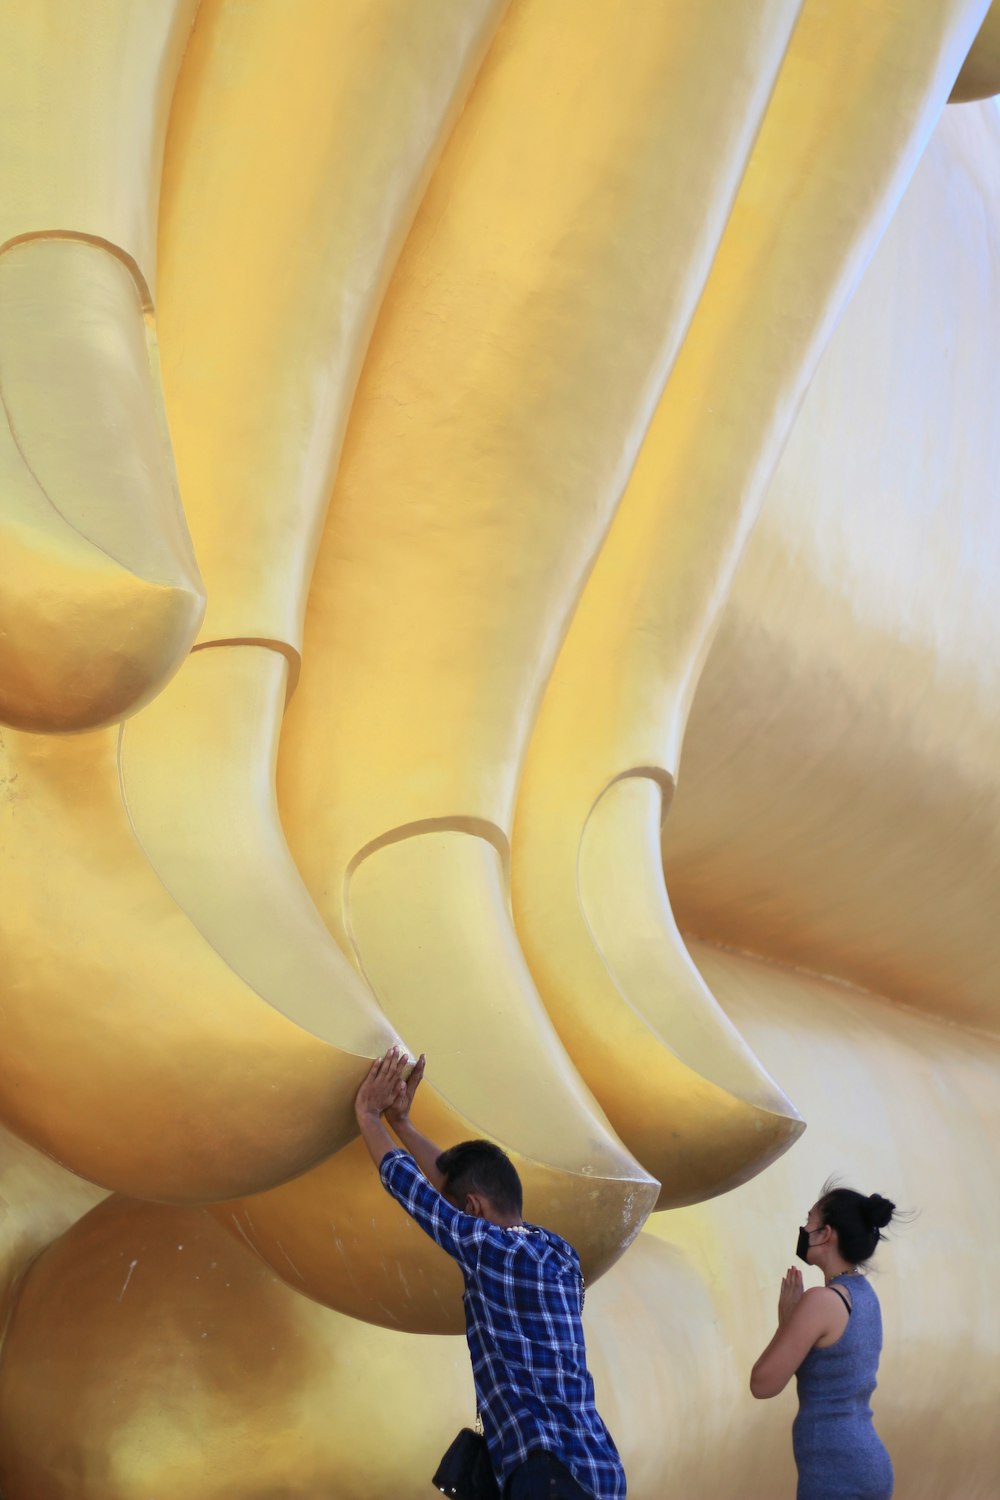 a man and a woman are painting a large banana sculpture